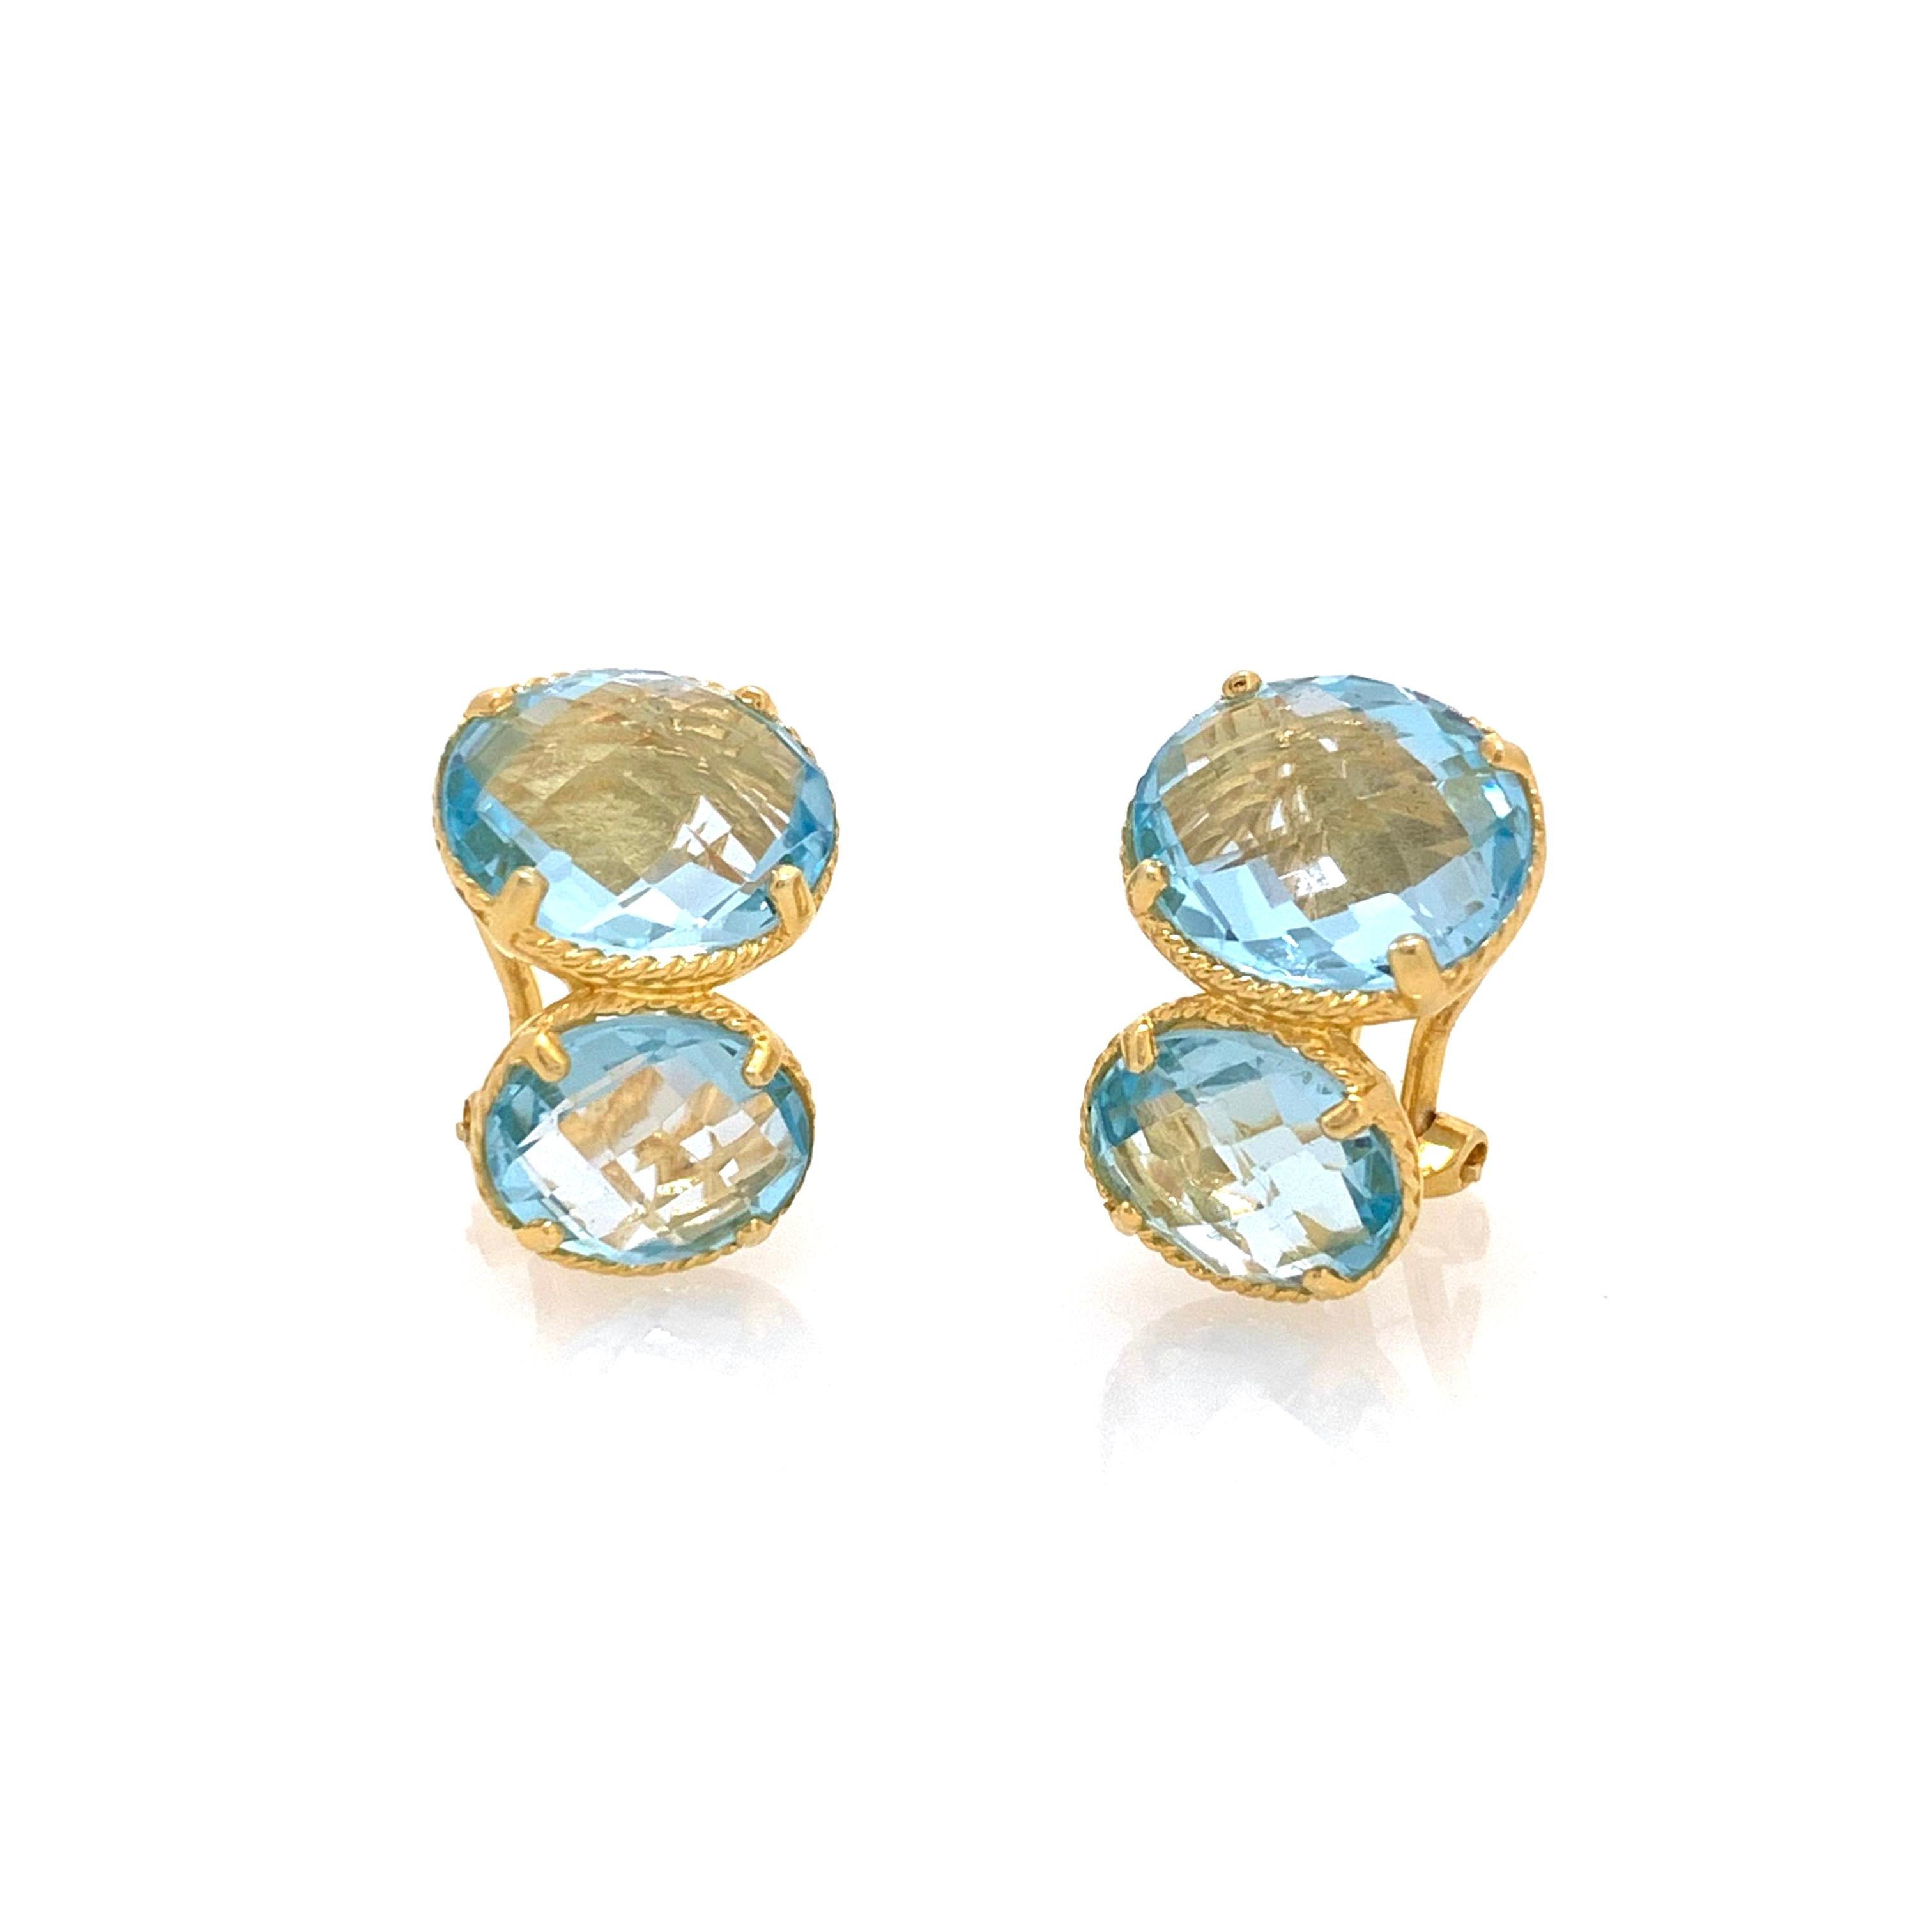 Contemporary Double Oval Blue Topaz Earrings